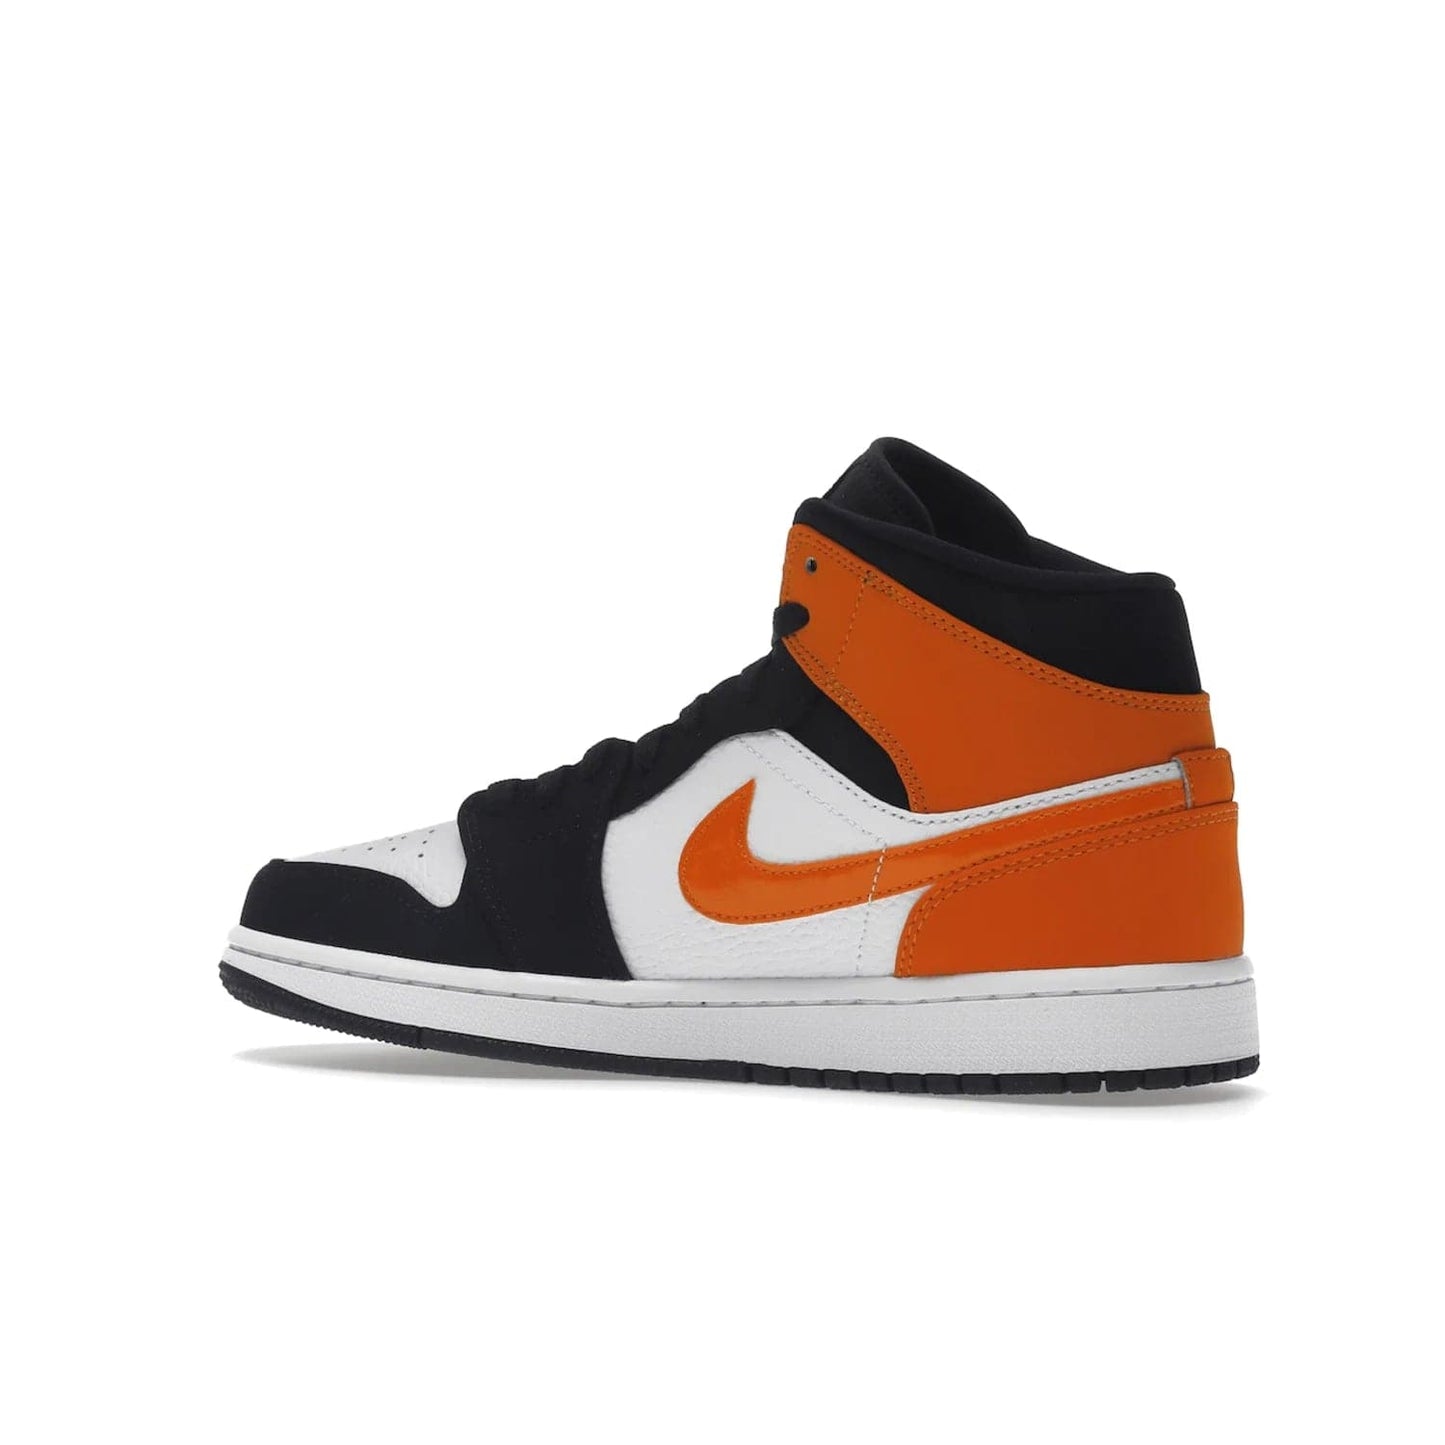 Jordan 1 Mid Shattered Backboard - Image 22 - Only at www.BallersClubKickz.com - The Air Jordan 1 Mid Shattered Backboard offers a timeless Black/White-Starfish colorway. Classic Swoosh logo and AJ insignia plus a shatterd backboard graphic on the insole. Get your pair today!